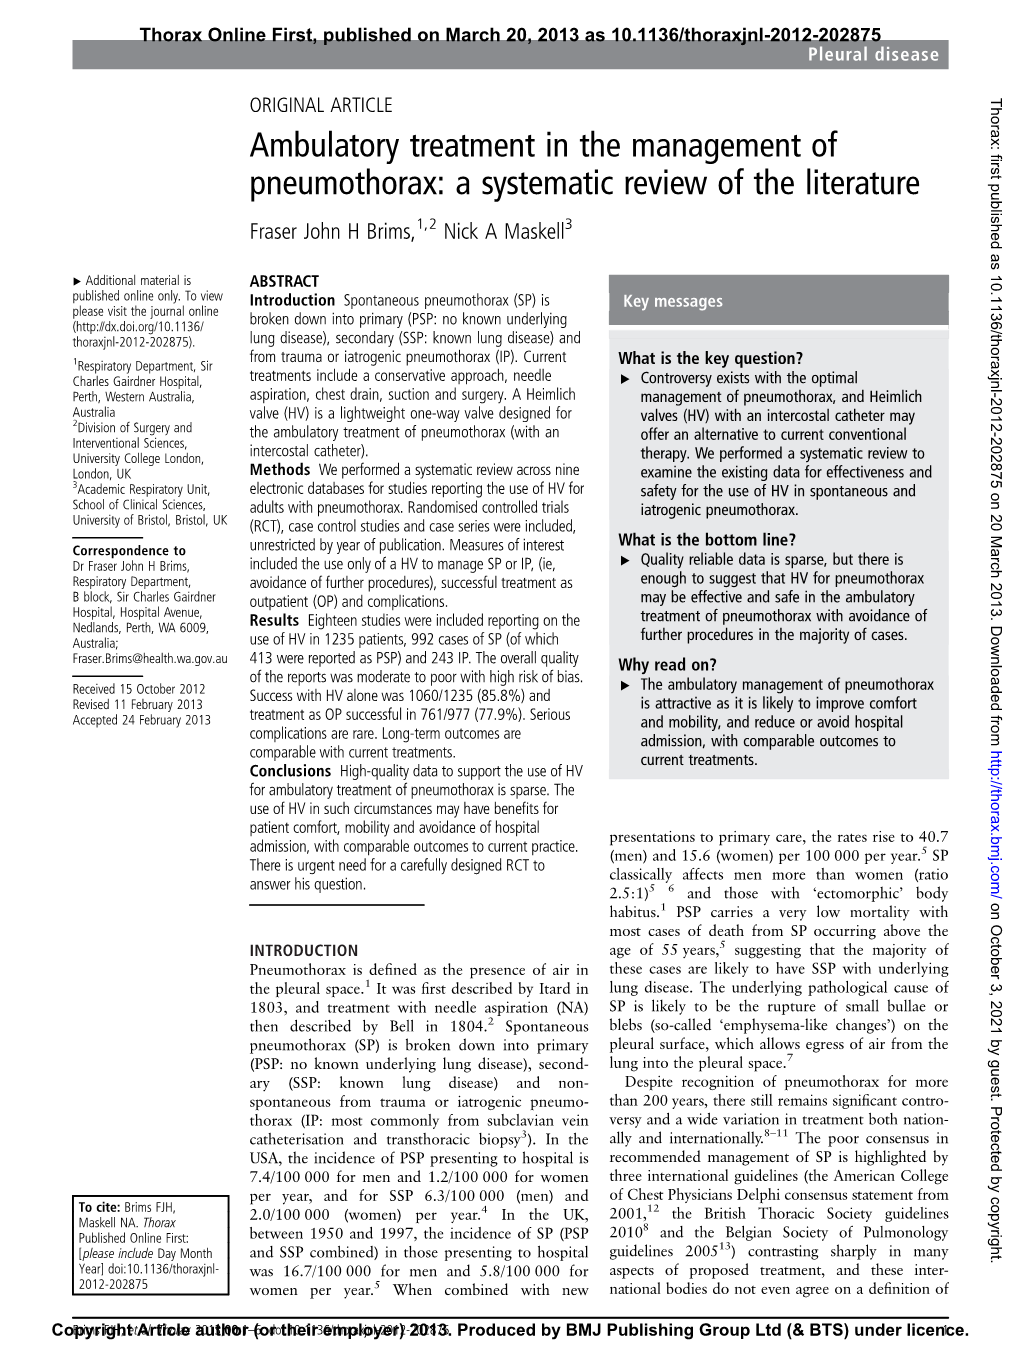 Ambulatory Treatment in the Management of Pneumothorax: a Systematic Review of the Literature Fraser John H Brims,1,2 Nick a Maskell3